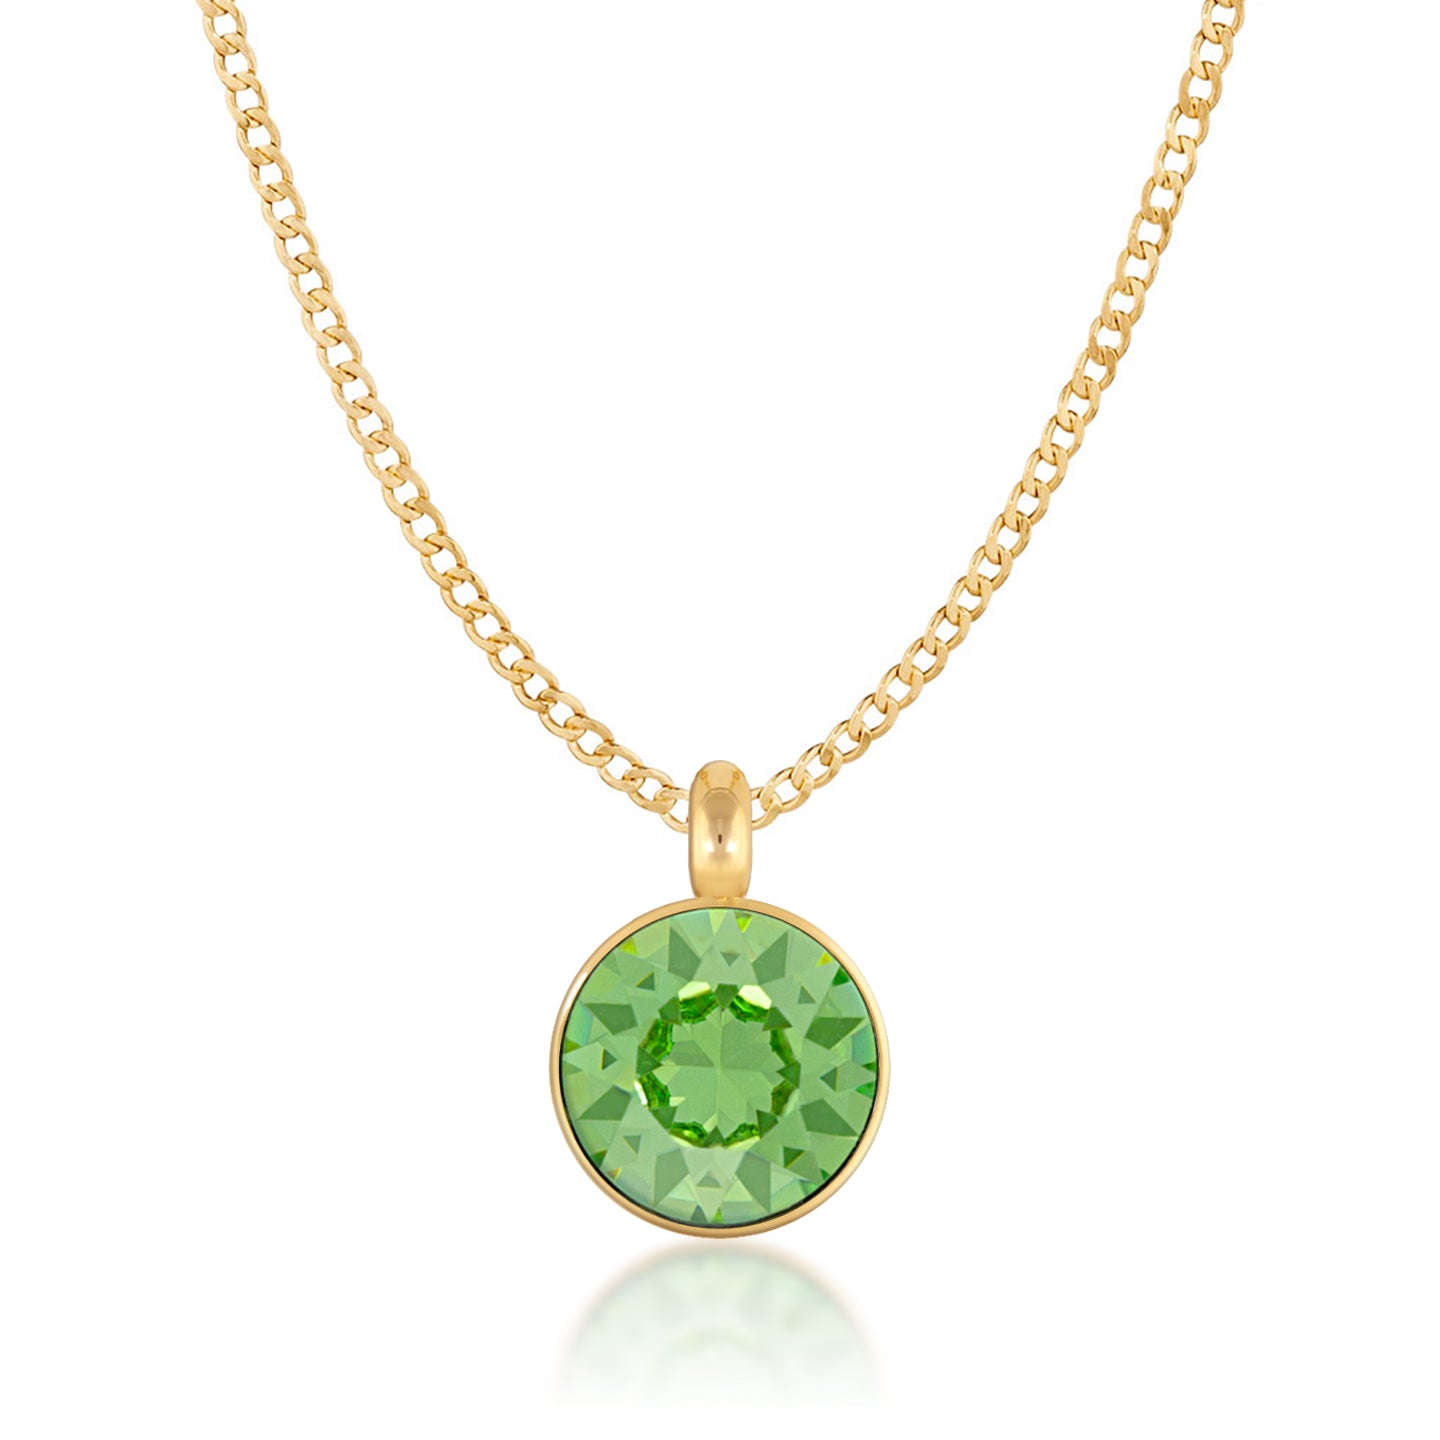 Bella Pendant Necklace with Green Peridot Round Crystals from Swarovski Gold Plated - Ed Heart